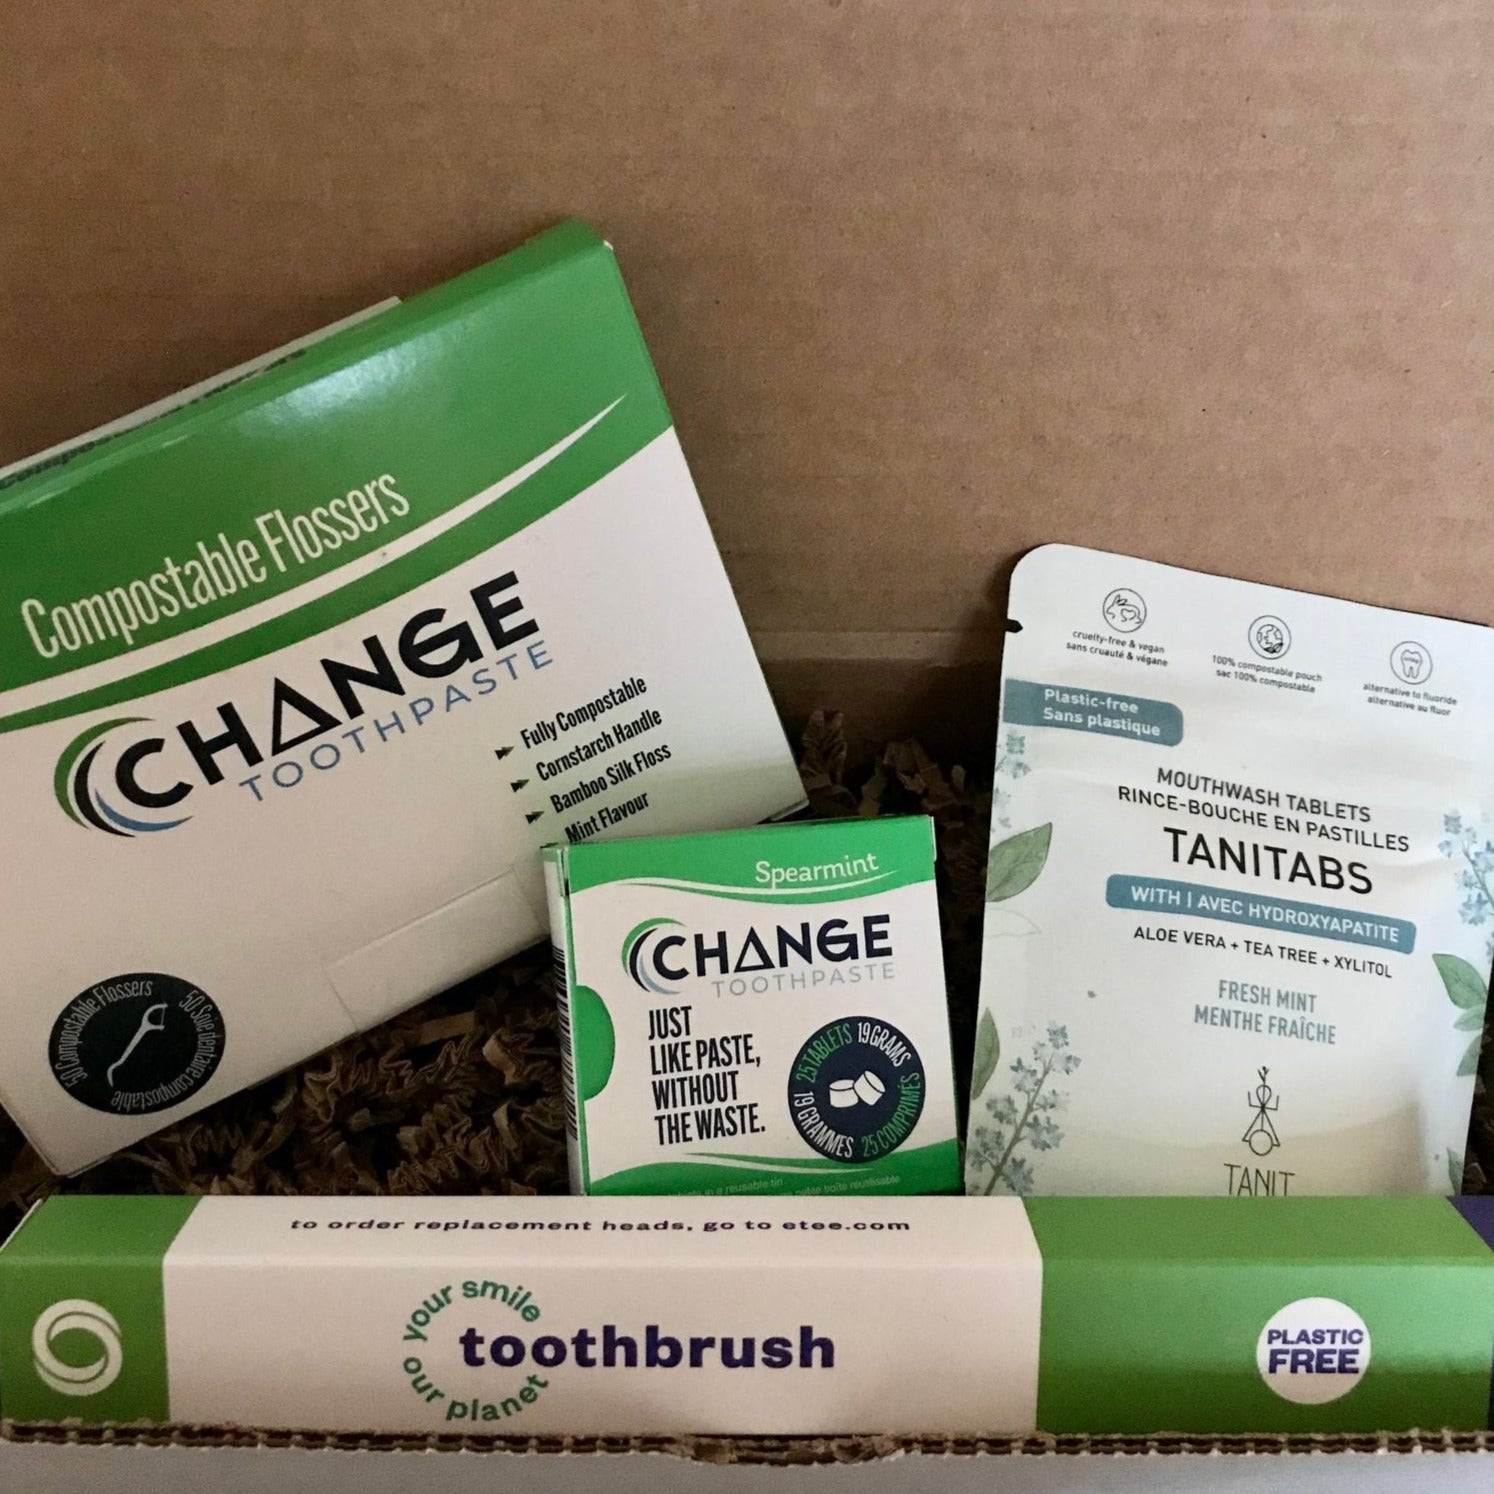 Each Canadian Dental Care Kit includes a 50 pack of compostable flossers, fresh mint mouthwash tablets (62 tablets), a replaceable head bamboo toothbrush and fluoride spearmint toothpaste tablets (65 tablets).